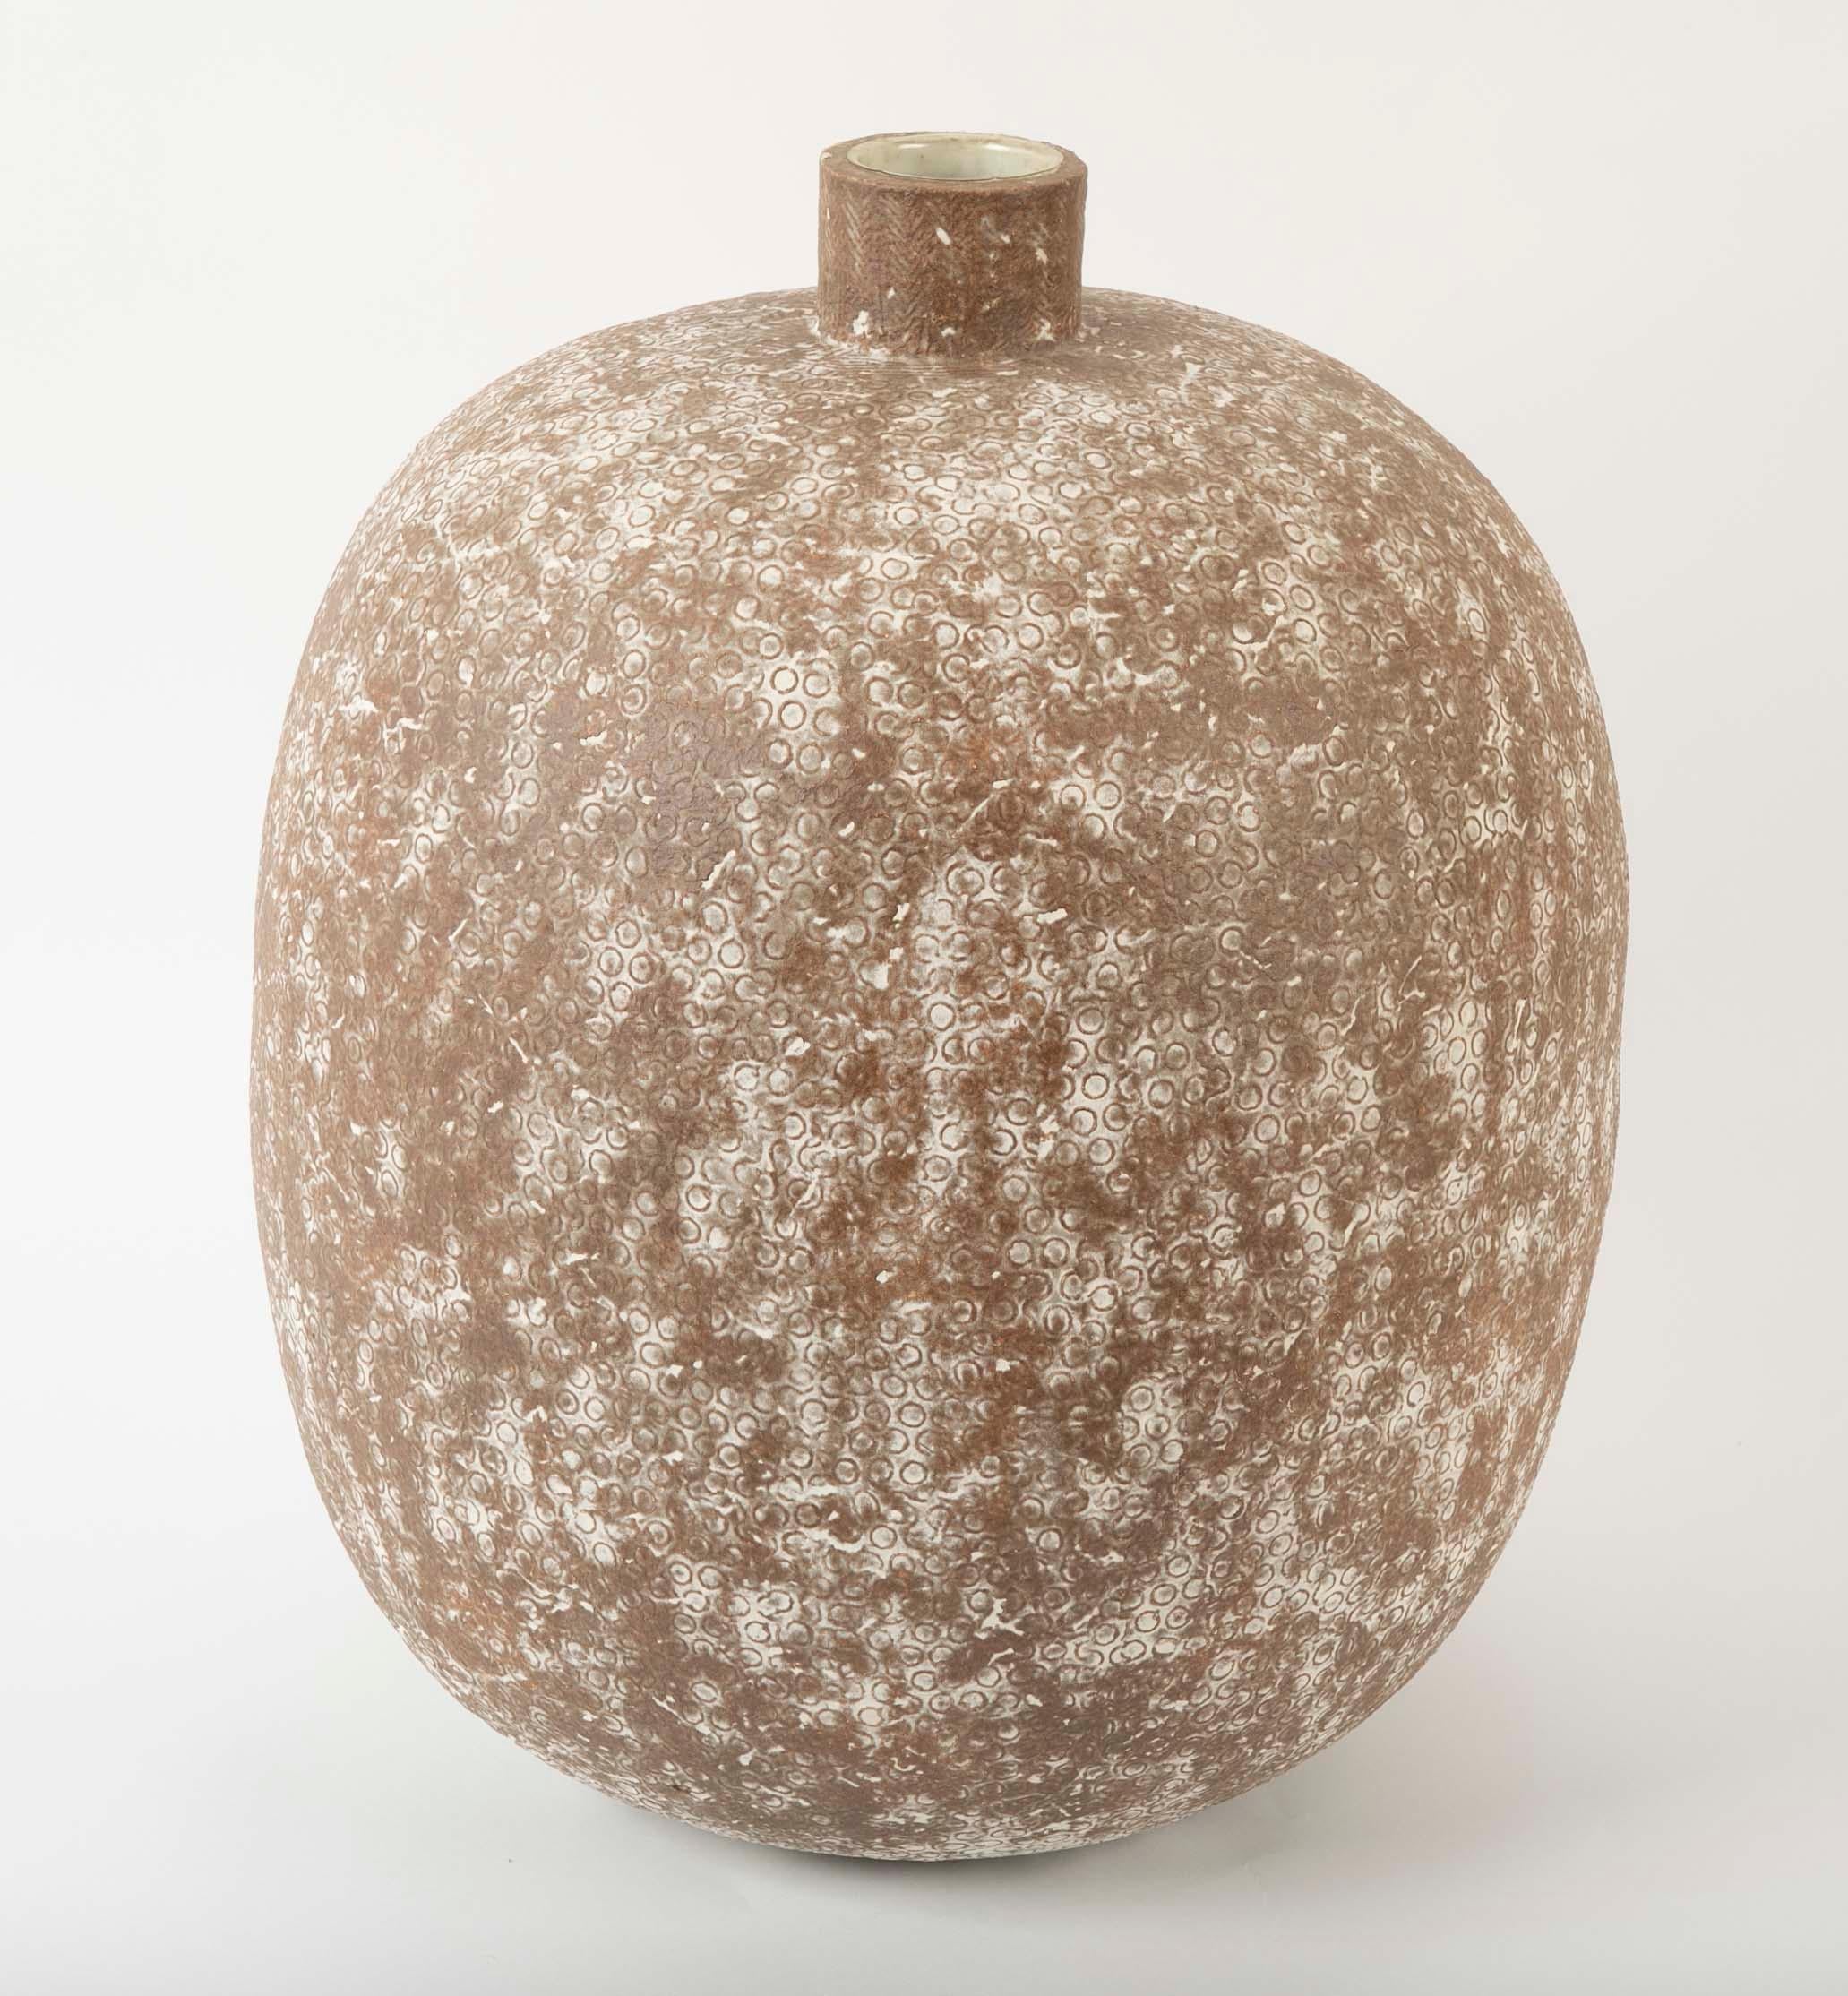 A large stoneware vessel by Claude Conover (American 1907-1994) titled 